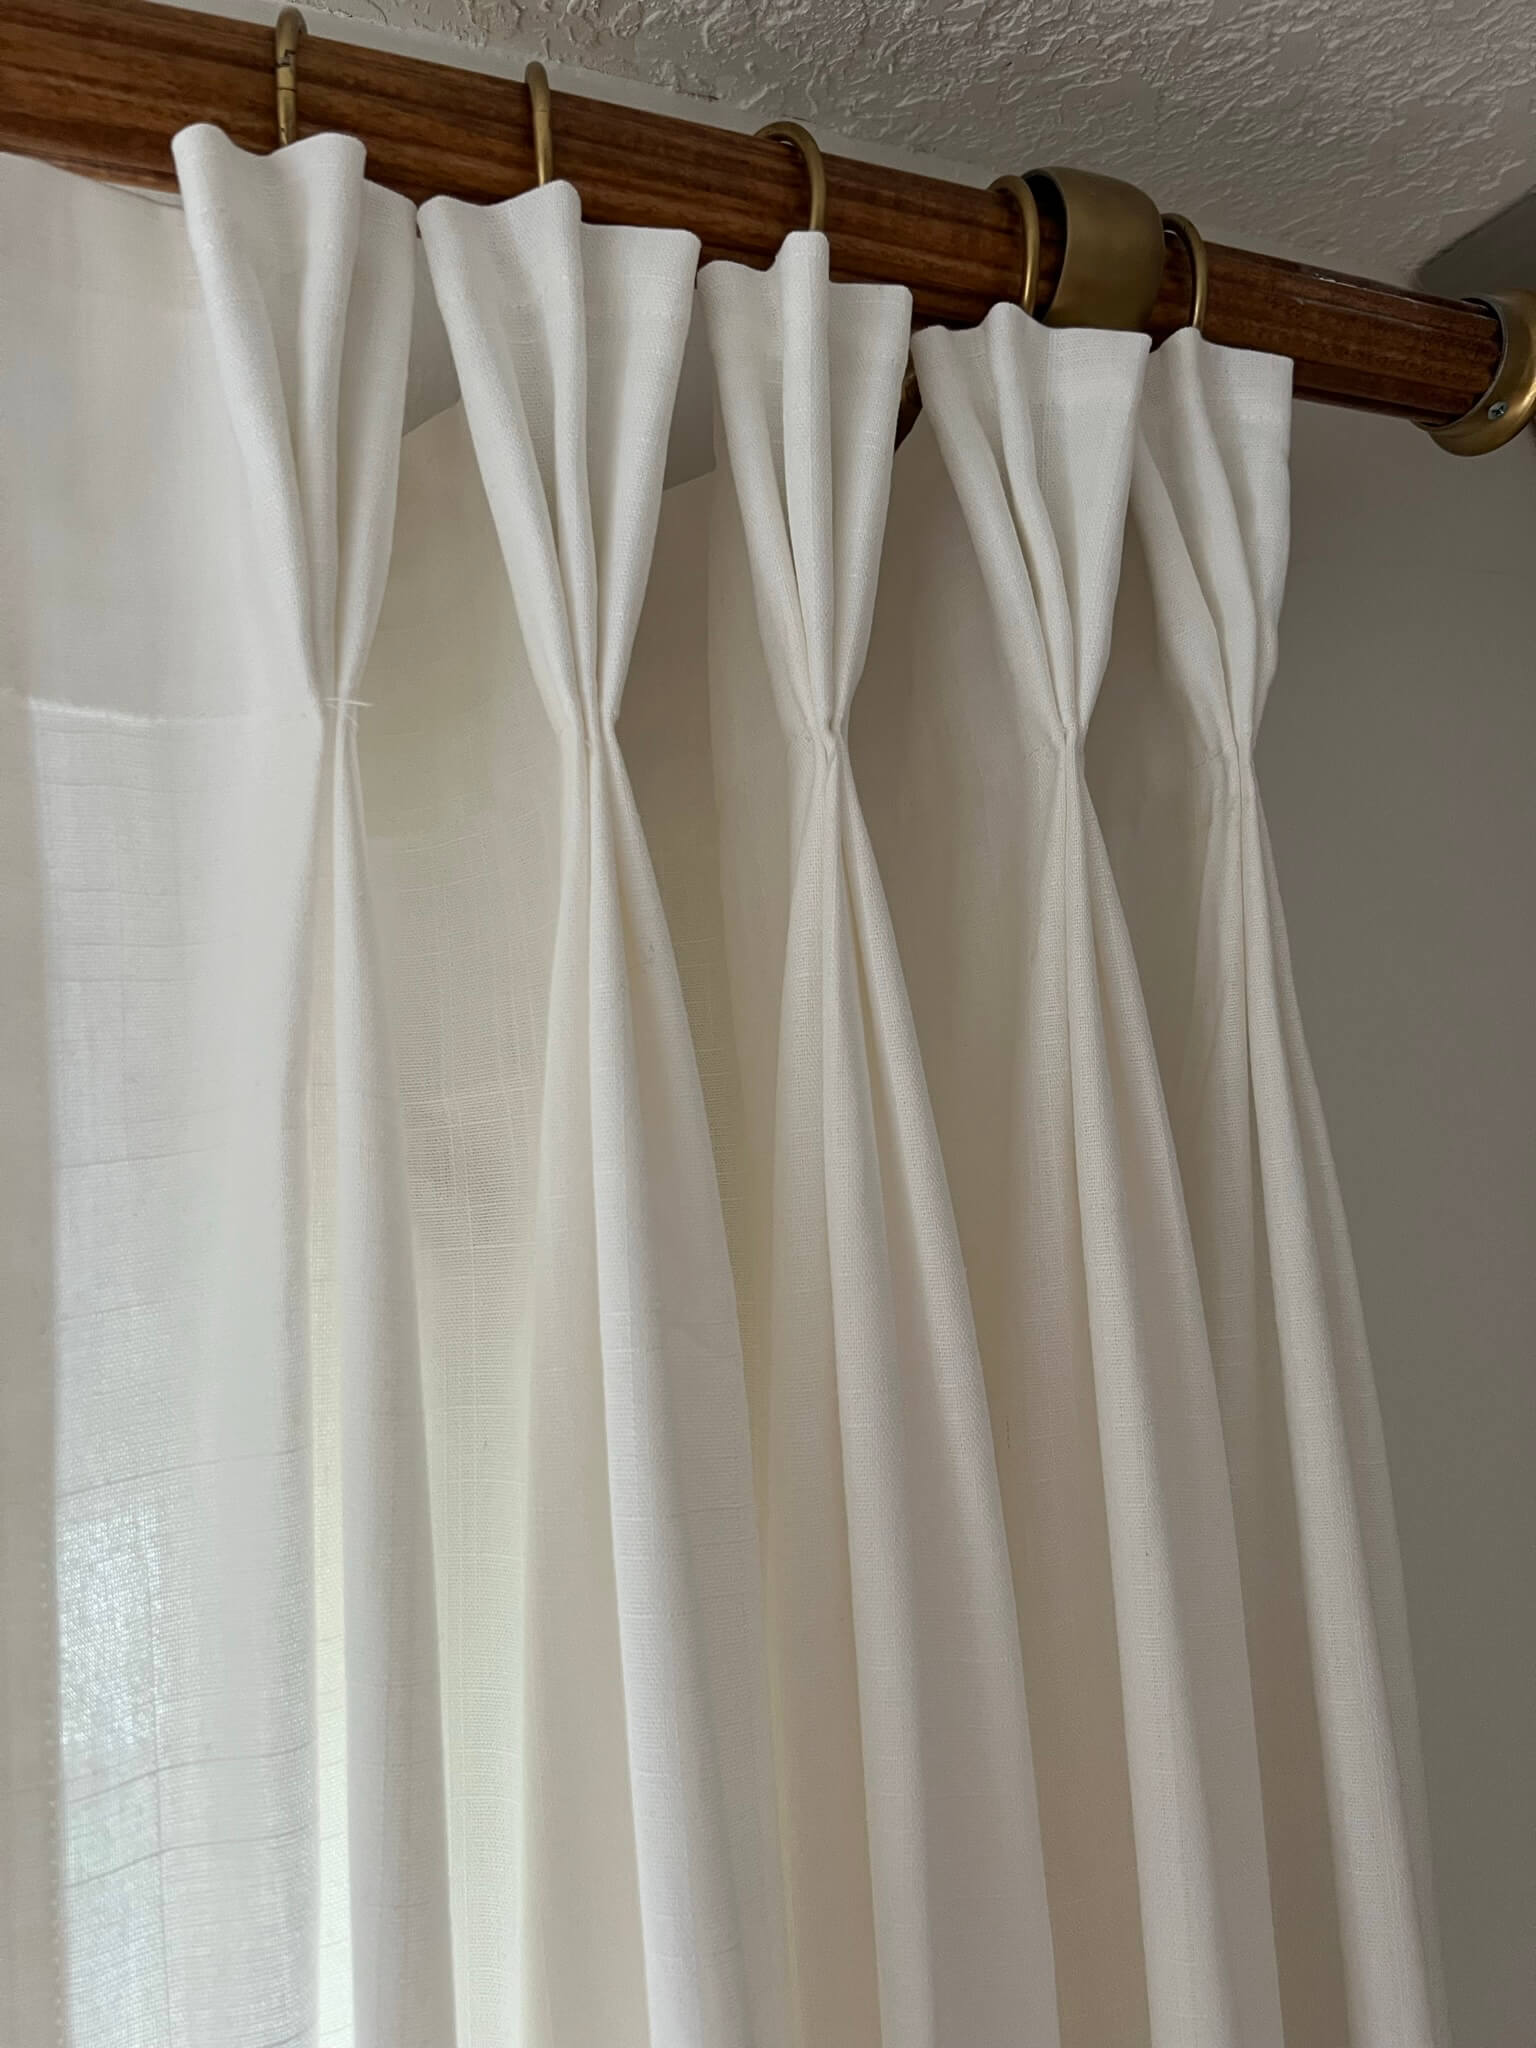 21 beautiful curtain ideas to brighten up your living space - 149